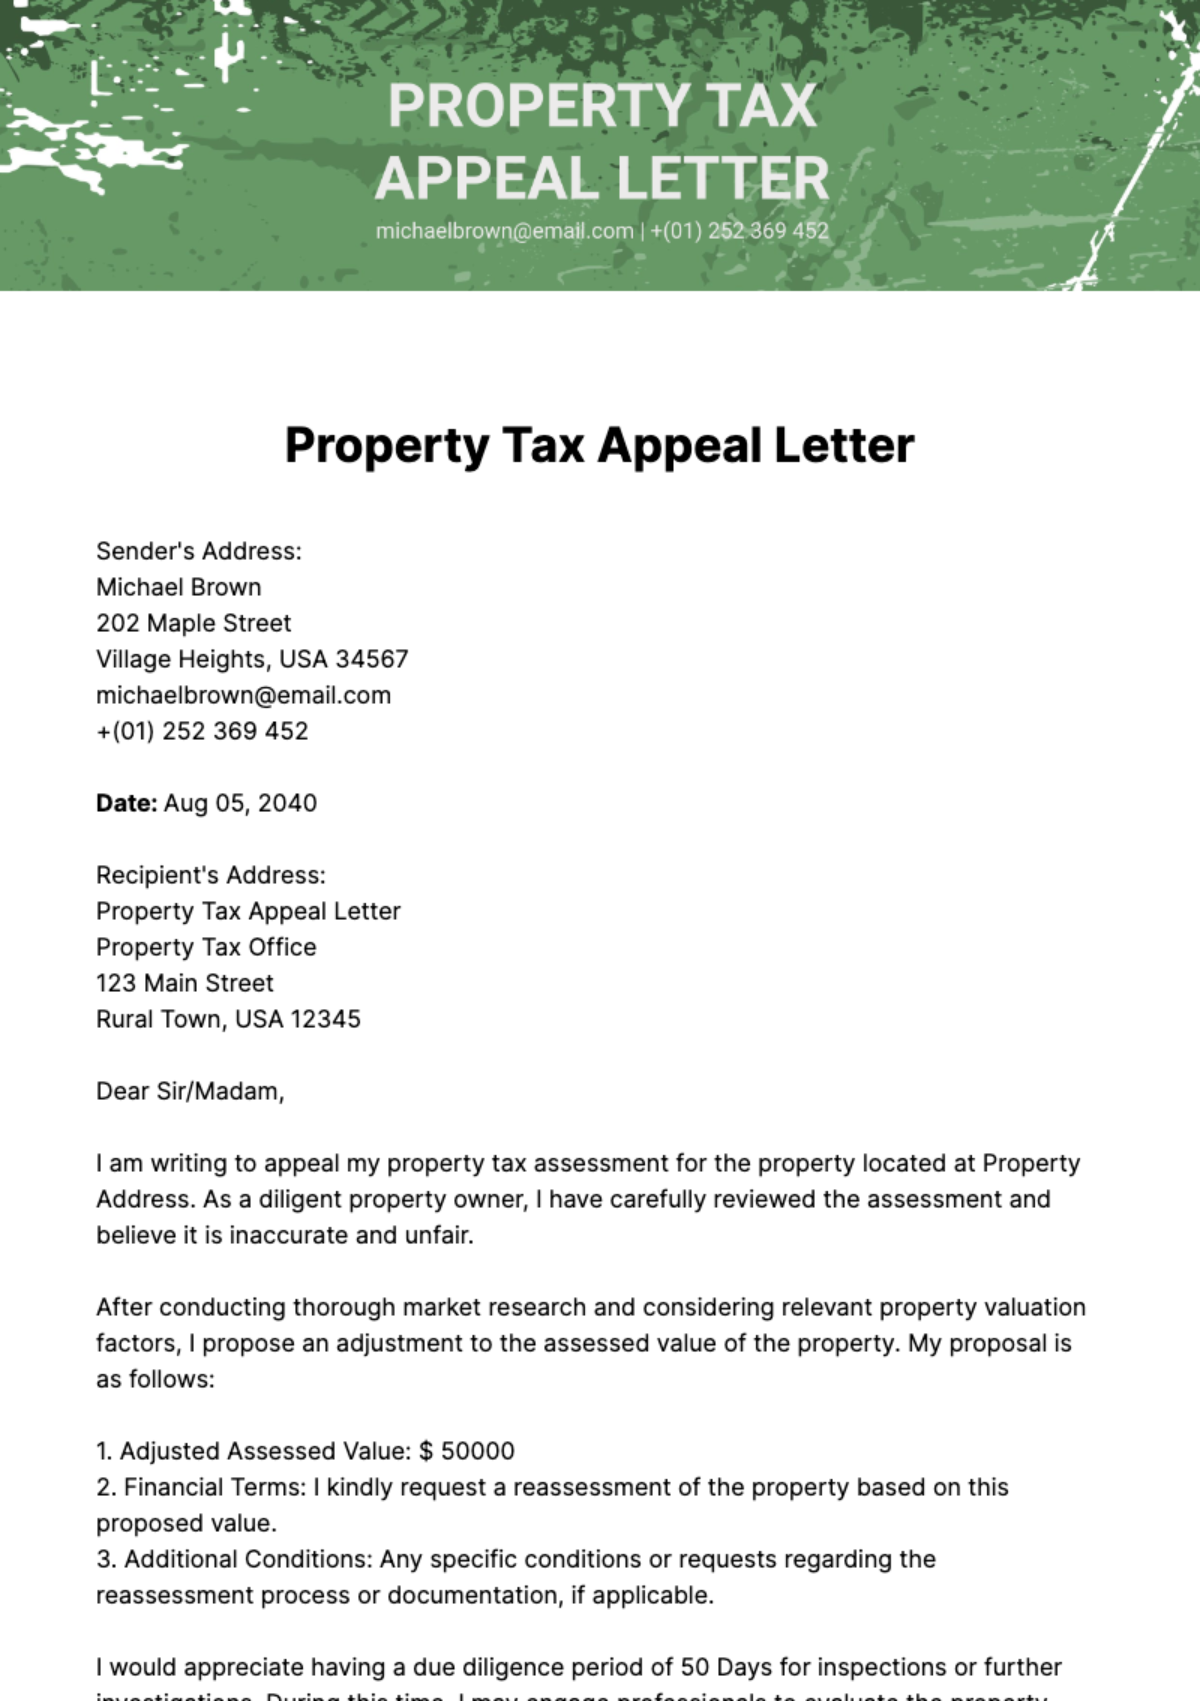 Property Tax Appeal Letter Template